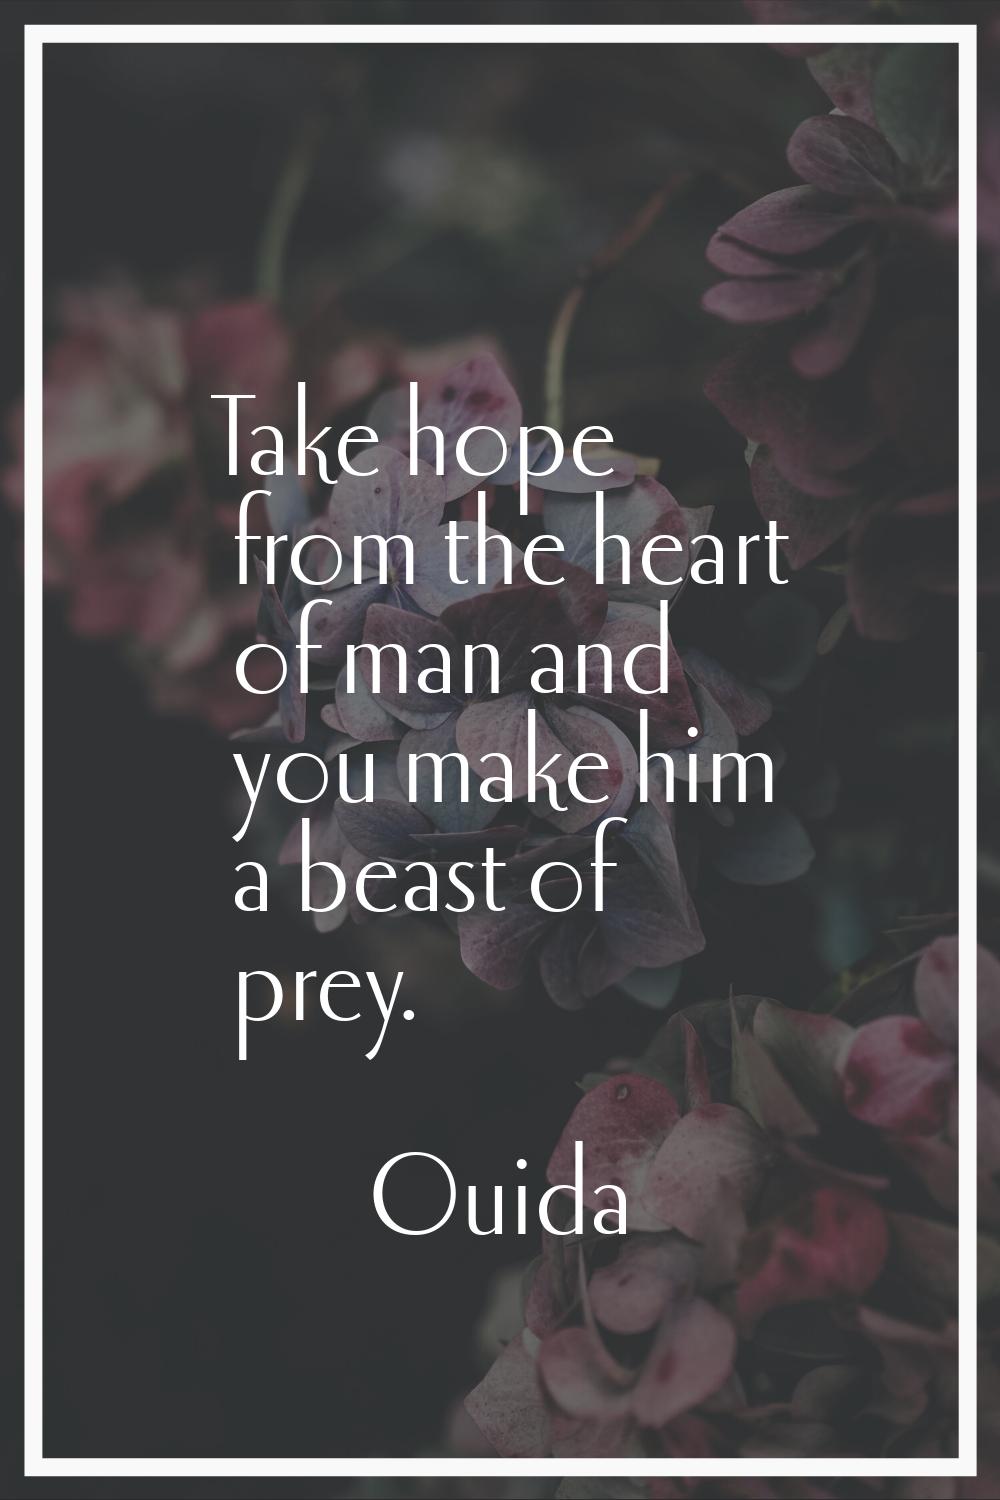 Take hope from the heart of man and you make him a beast of prey.